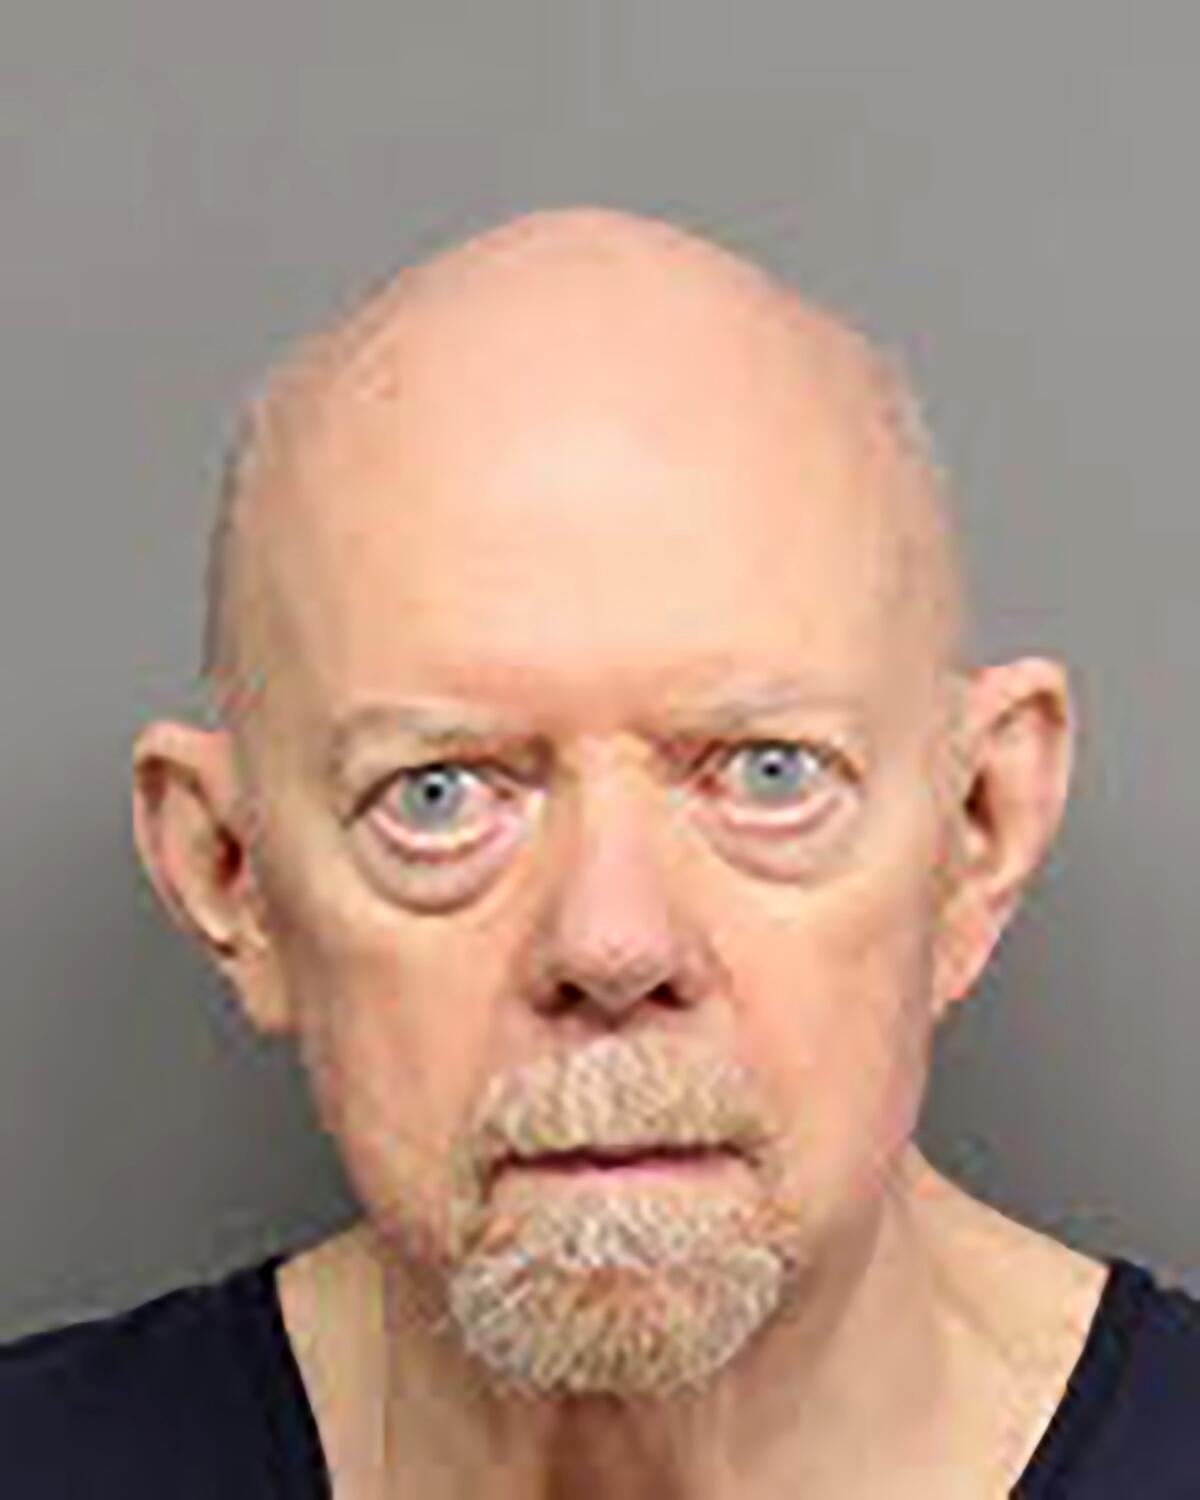 This undated photo provided by the Lancaster County, Nebraska, jail shows John Kotopka. Kotopka, an 80-year-old Nebraska man who told police he shot his wife, who had Alzheimer's disease, because he was struggling to care for her is now facing murder charges. Prosecutors upgraded the charges against Kotopka to first-degree murder Wednesday, June 30, 2021, following last week's death of 78-year-old Janet Kotopka. (Lancaster County, Nebraska, jail via AP)